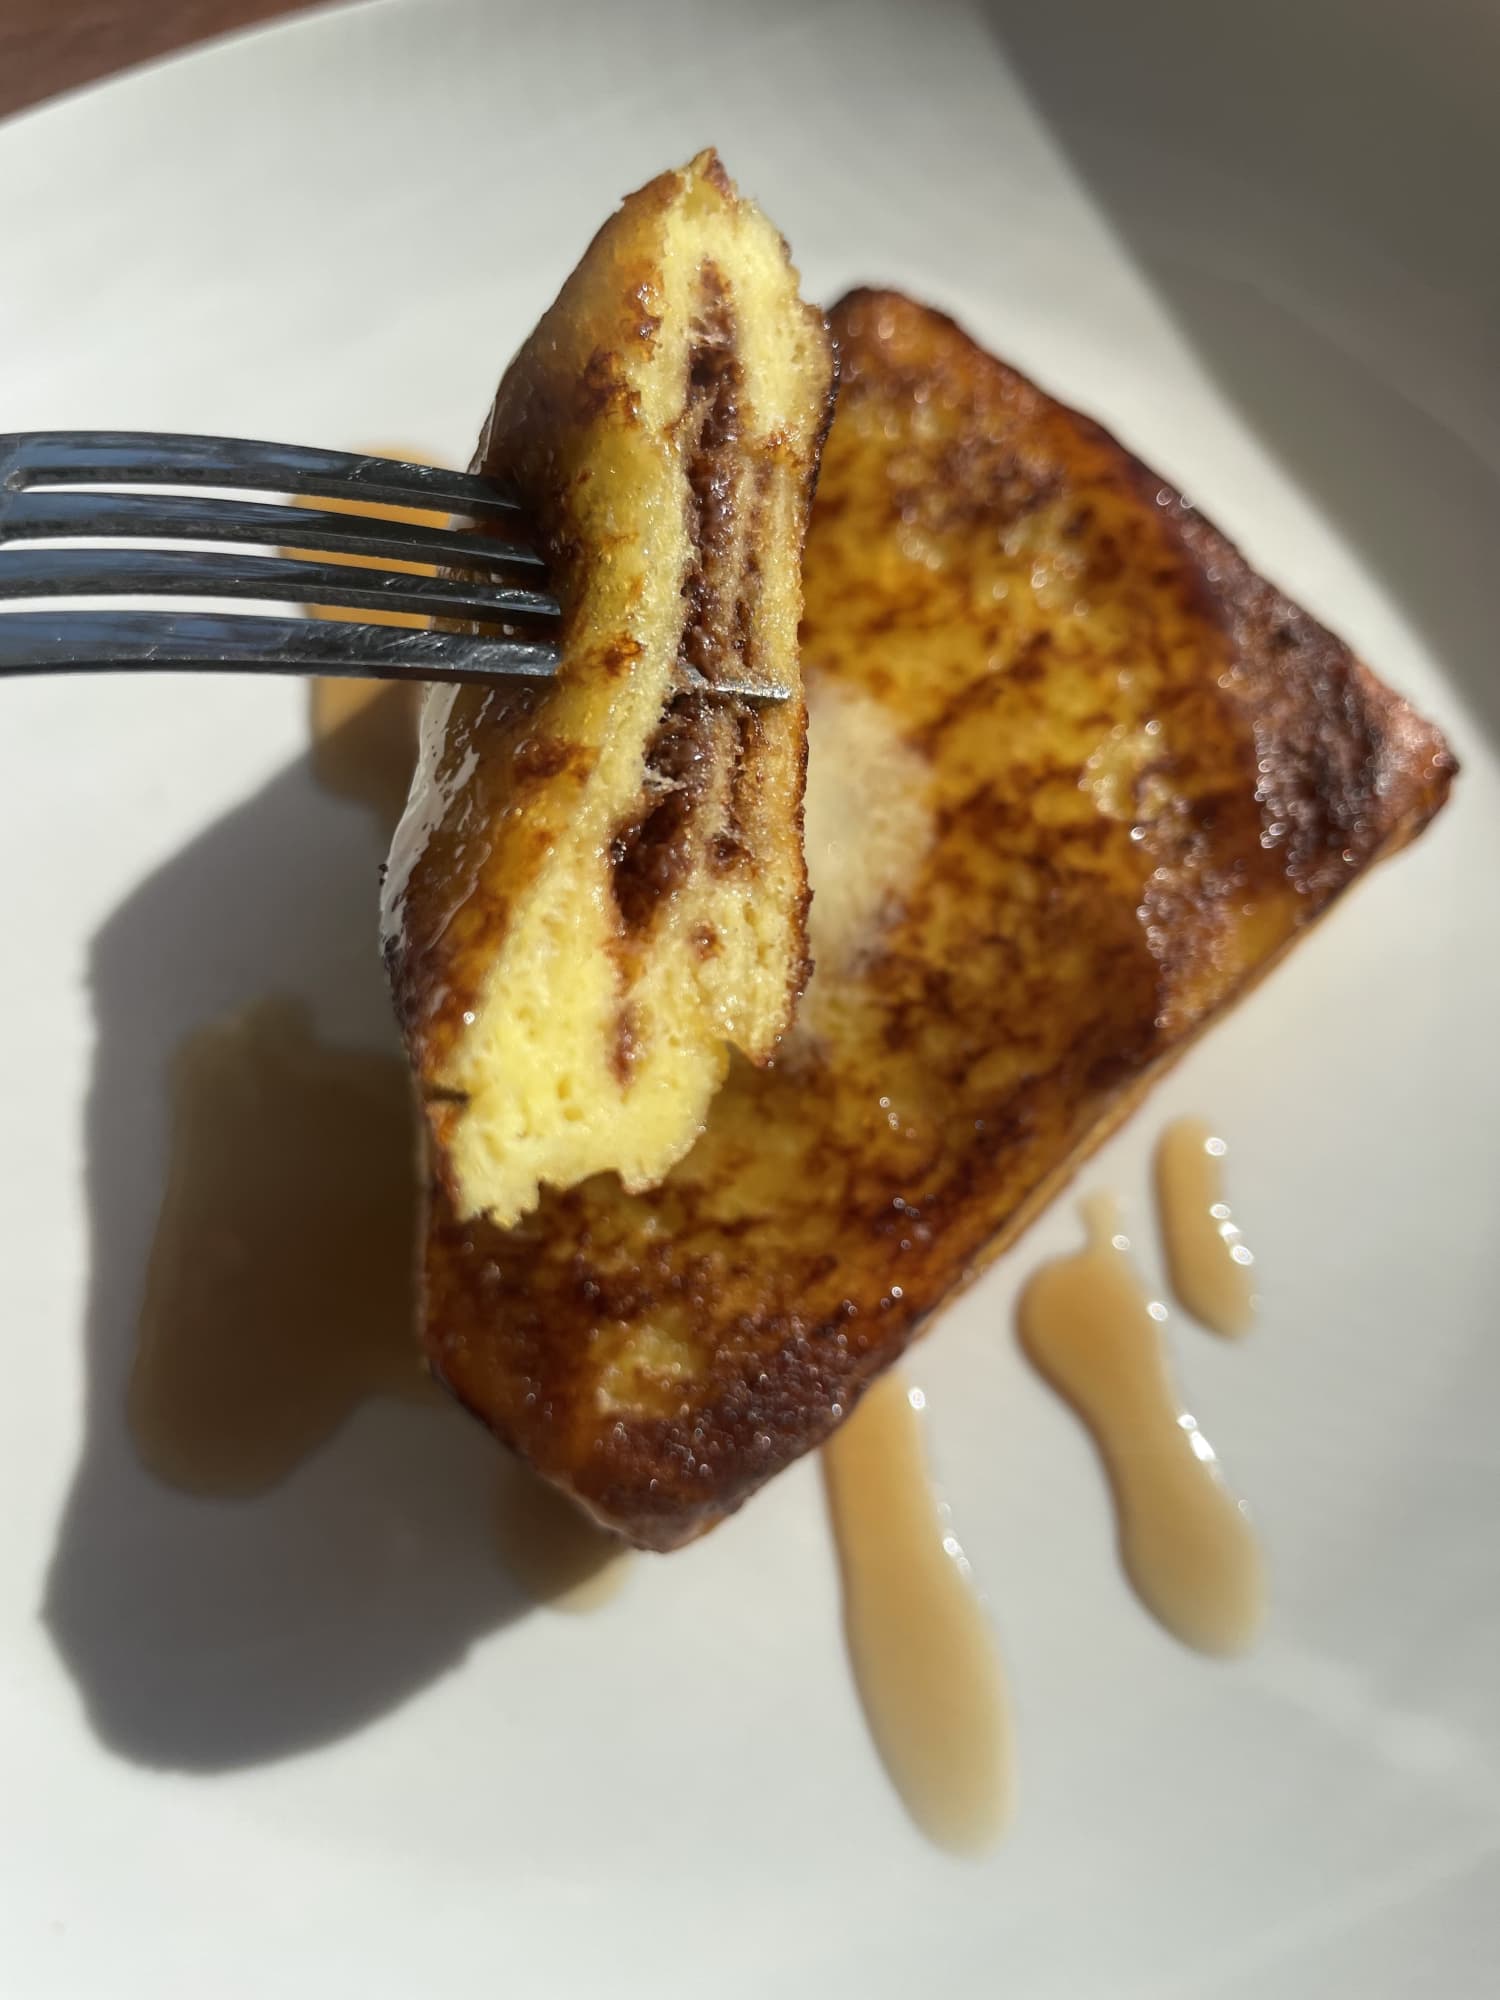 I Tried Hong Kong-Style French Toast and It Was So Good, I Made It Twice in One Day